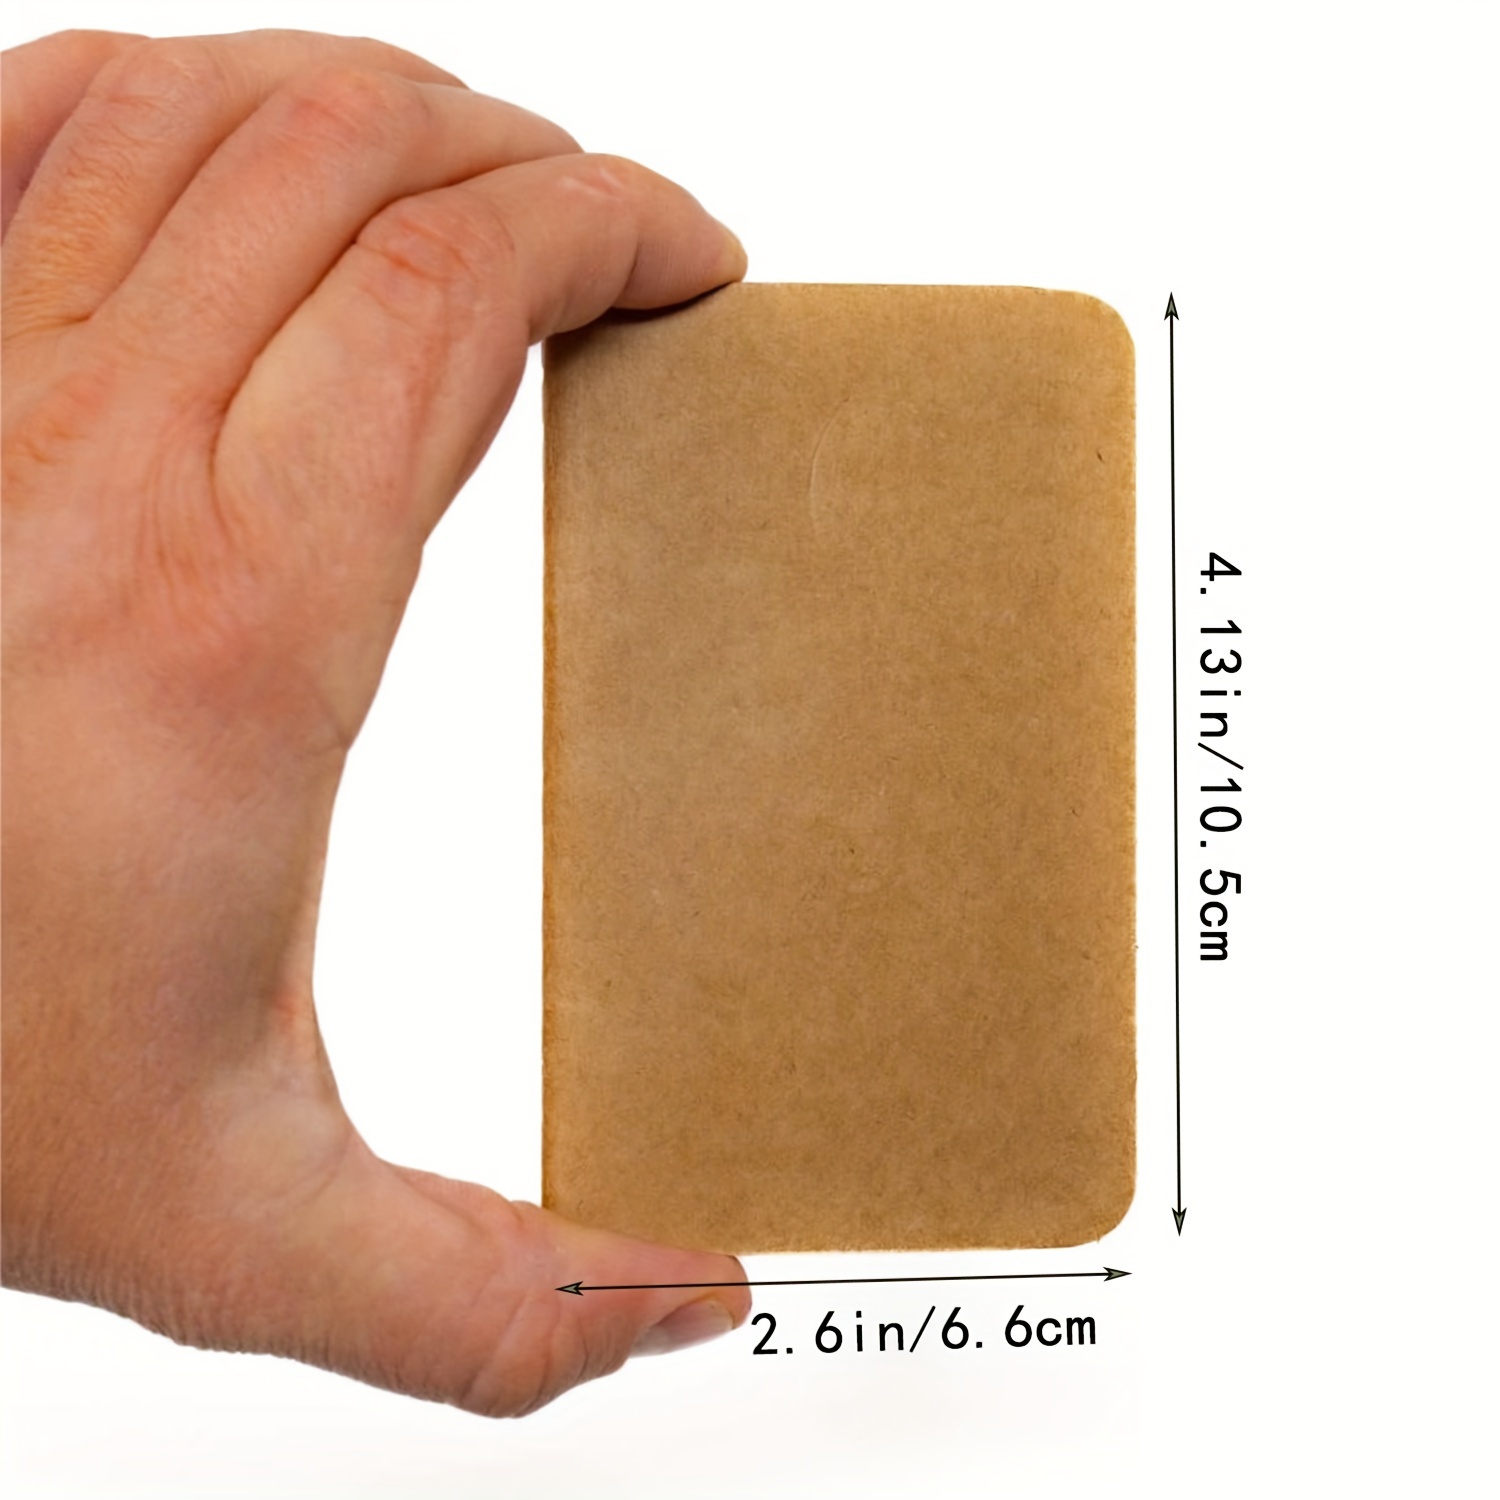 

Compact Kraft Brown Pocket Notebook - Softcover, 2.55" X 4.13", Lined Memo Pad For Travelers & Writers, 60 Sheets Hardcover Notebook Small Notebook With Pen